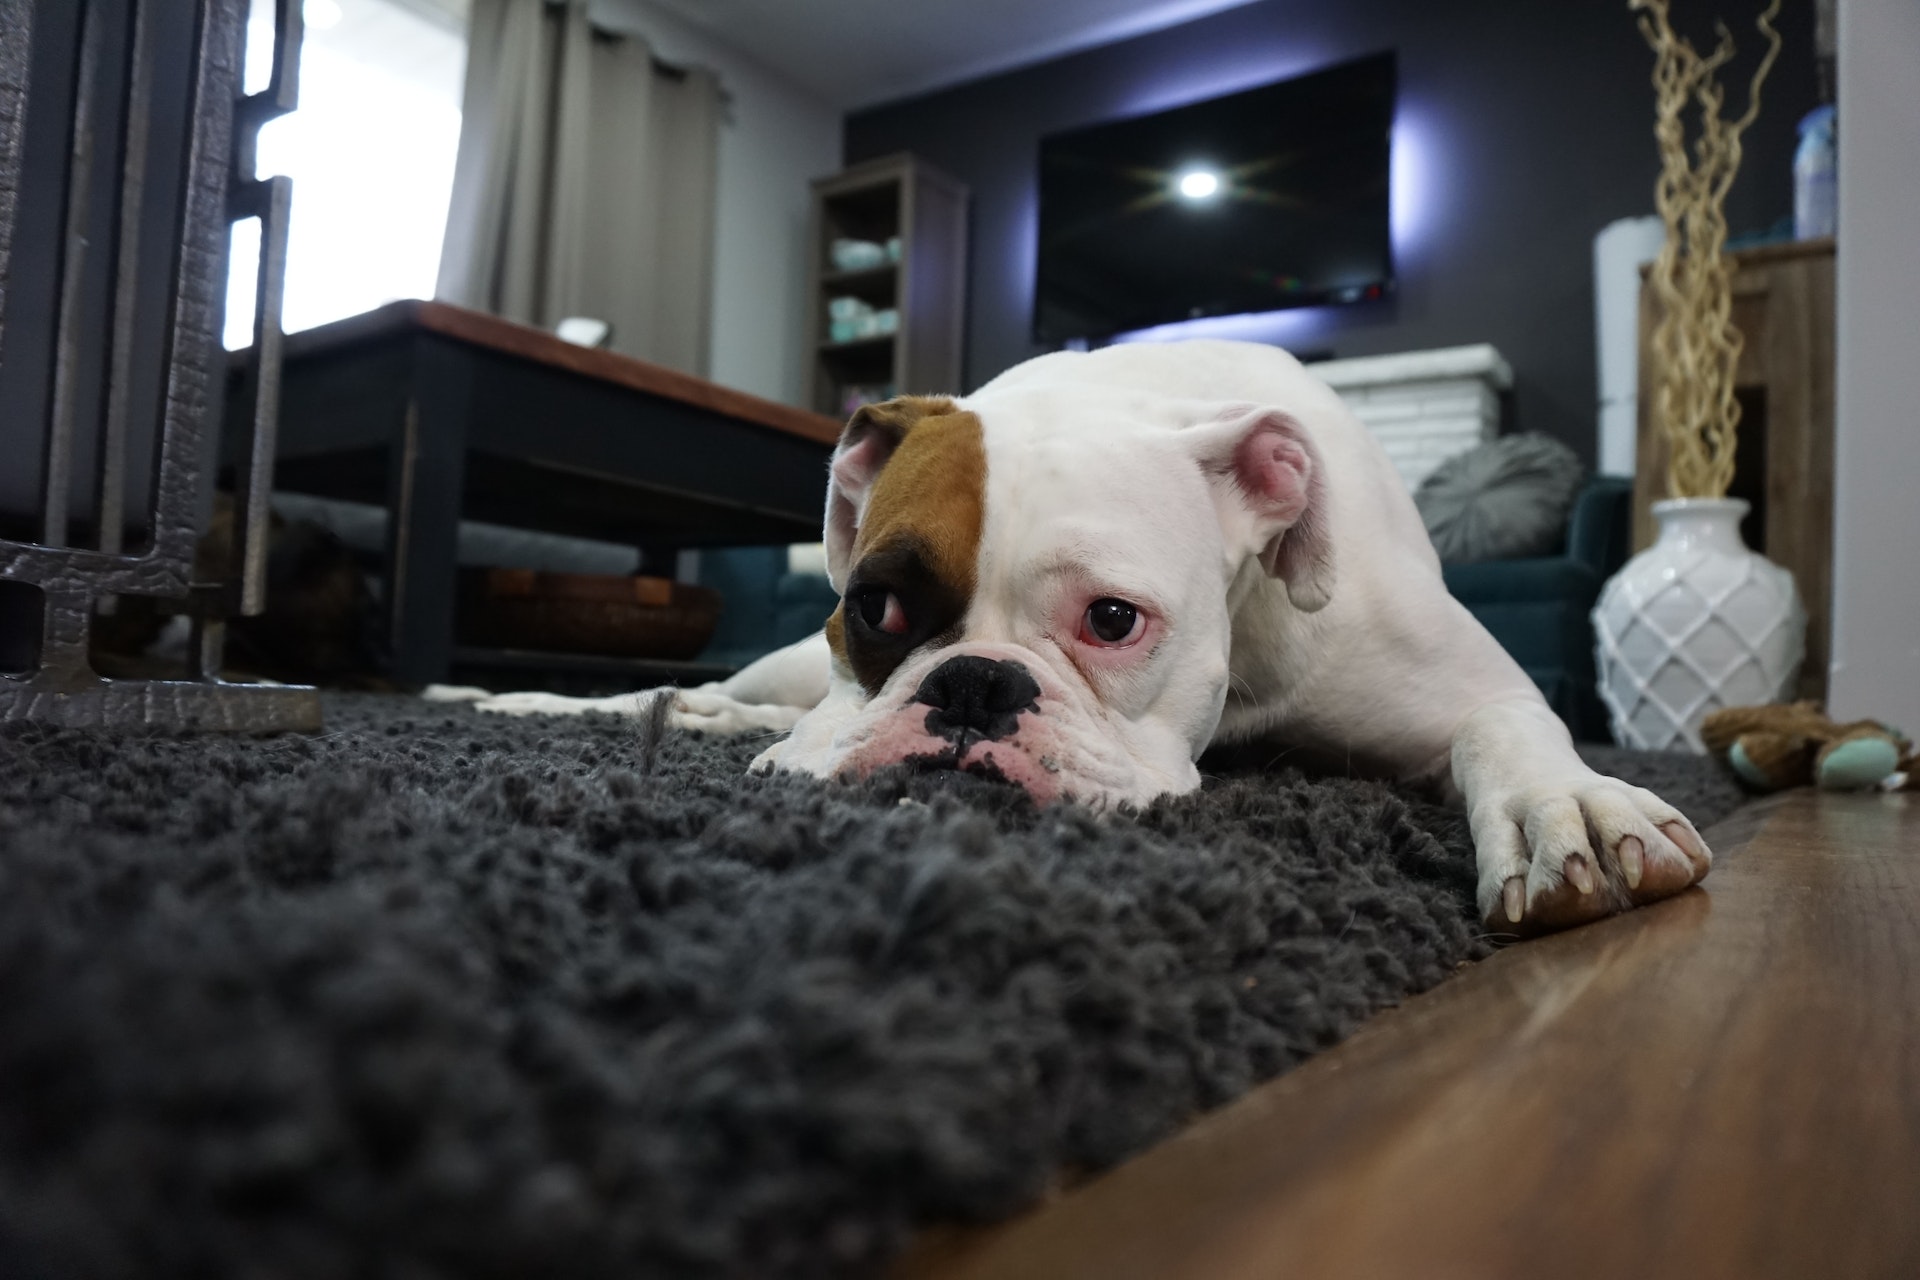 A white boxer dog with a large brown spot over one eye lays on a shaggy charcoal carpet. One paw rests on a hardwood floor that meets the carpet. In the background is a modern living room, full of furniture and shelves.